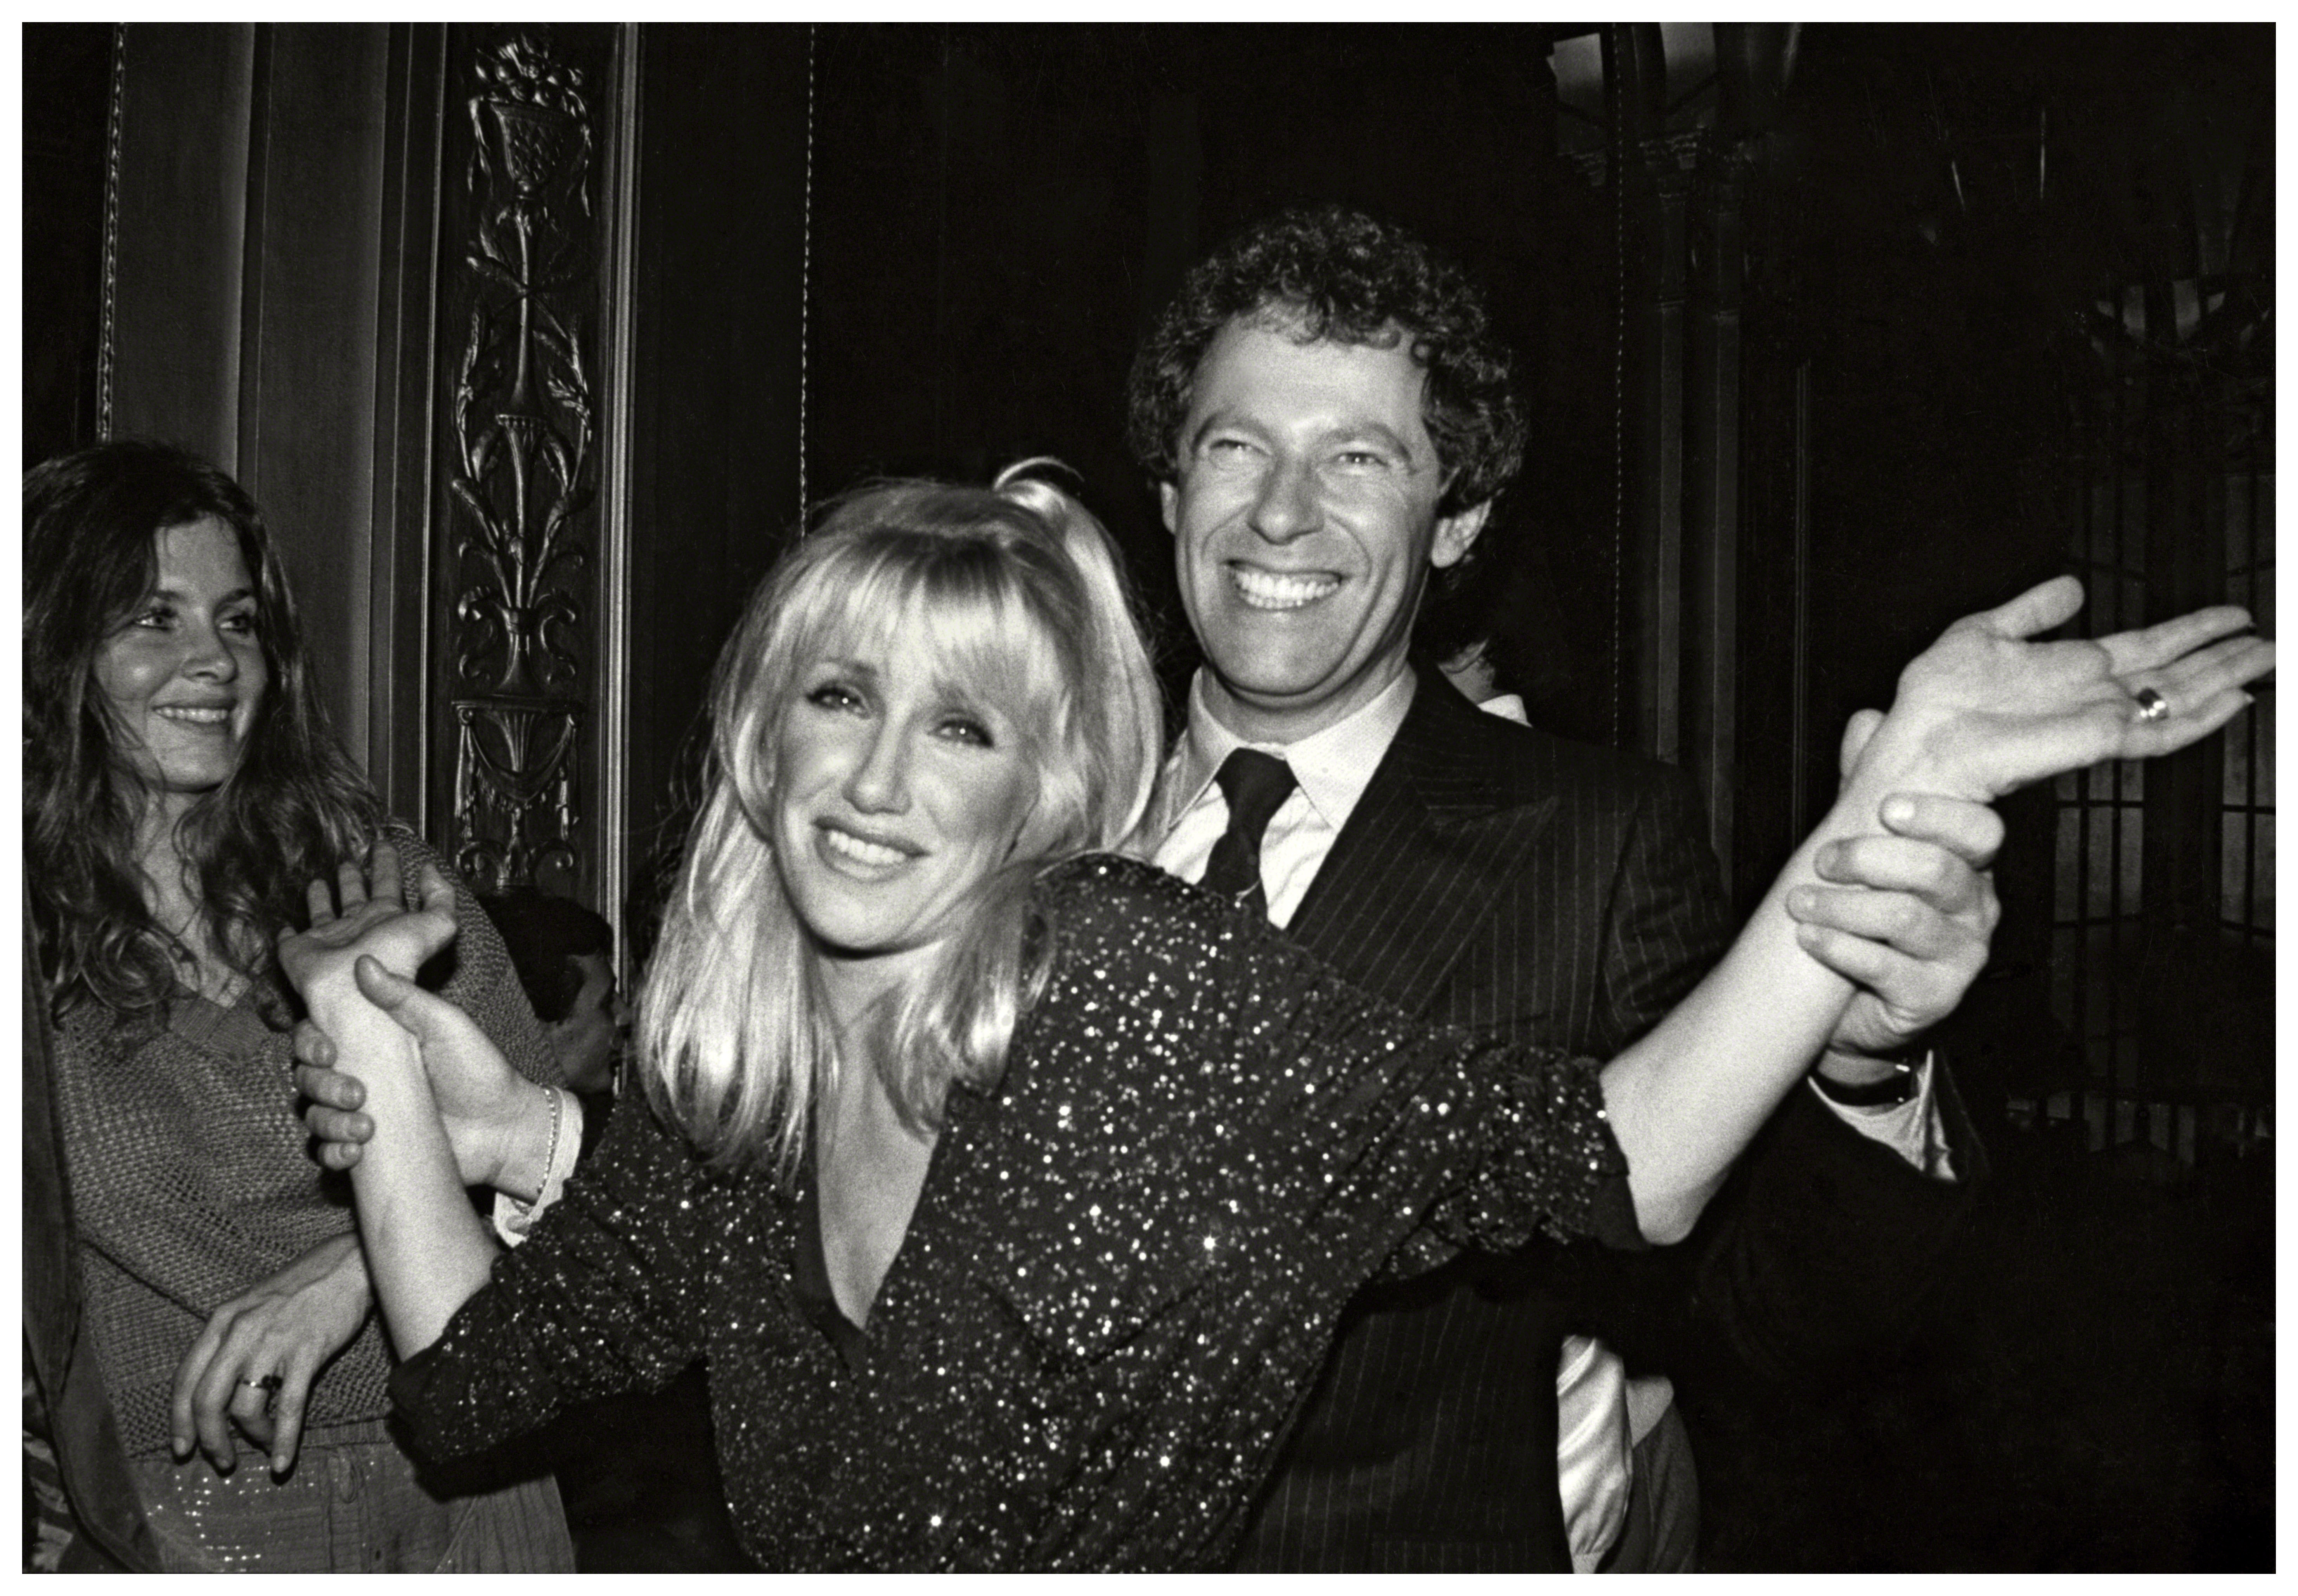 Suzanne Somers and Alan Hamel at Studio 54 in New York City in 1978 | Source: Getty Images